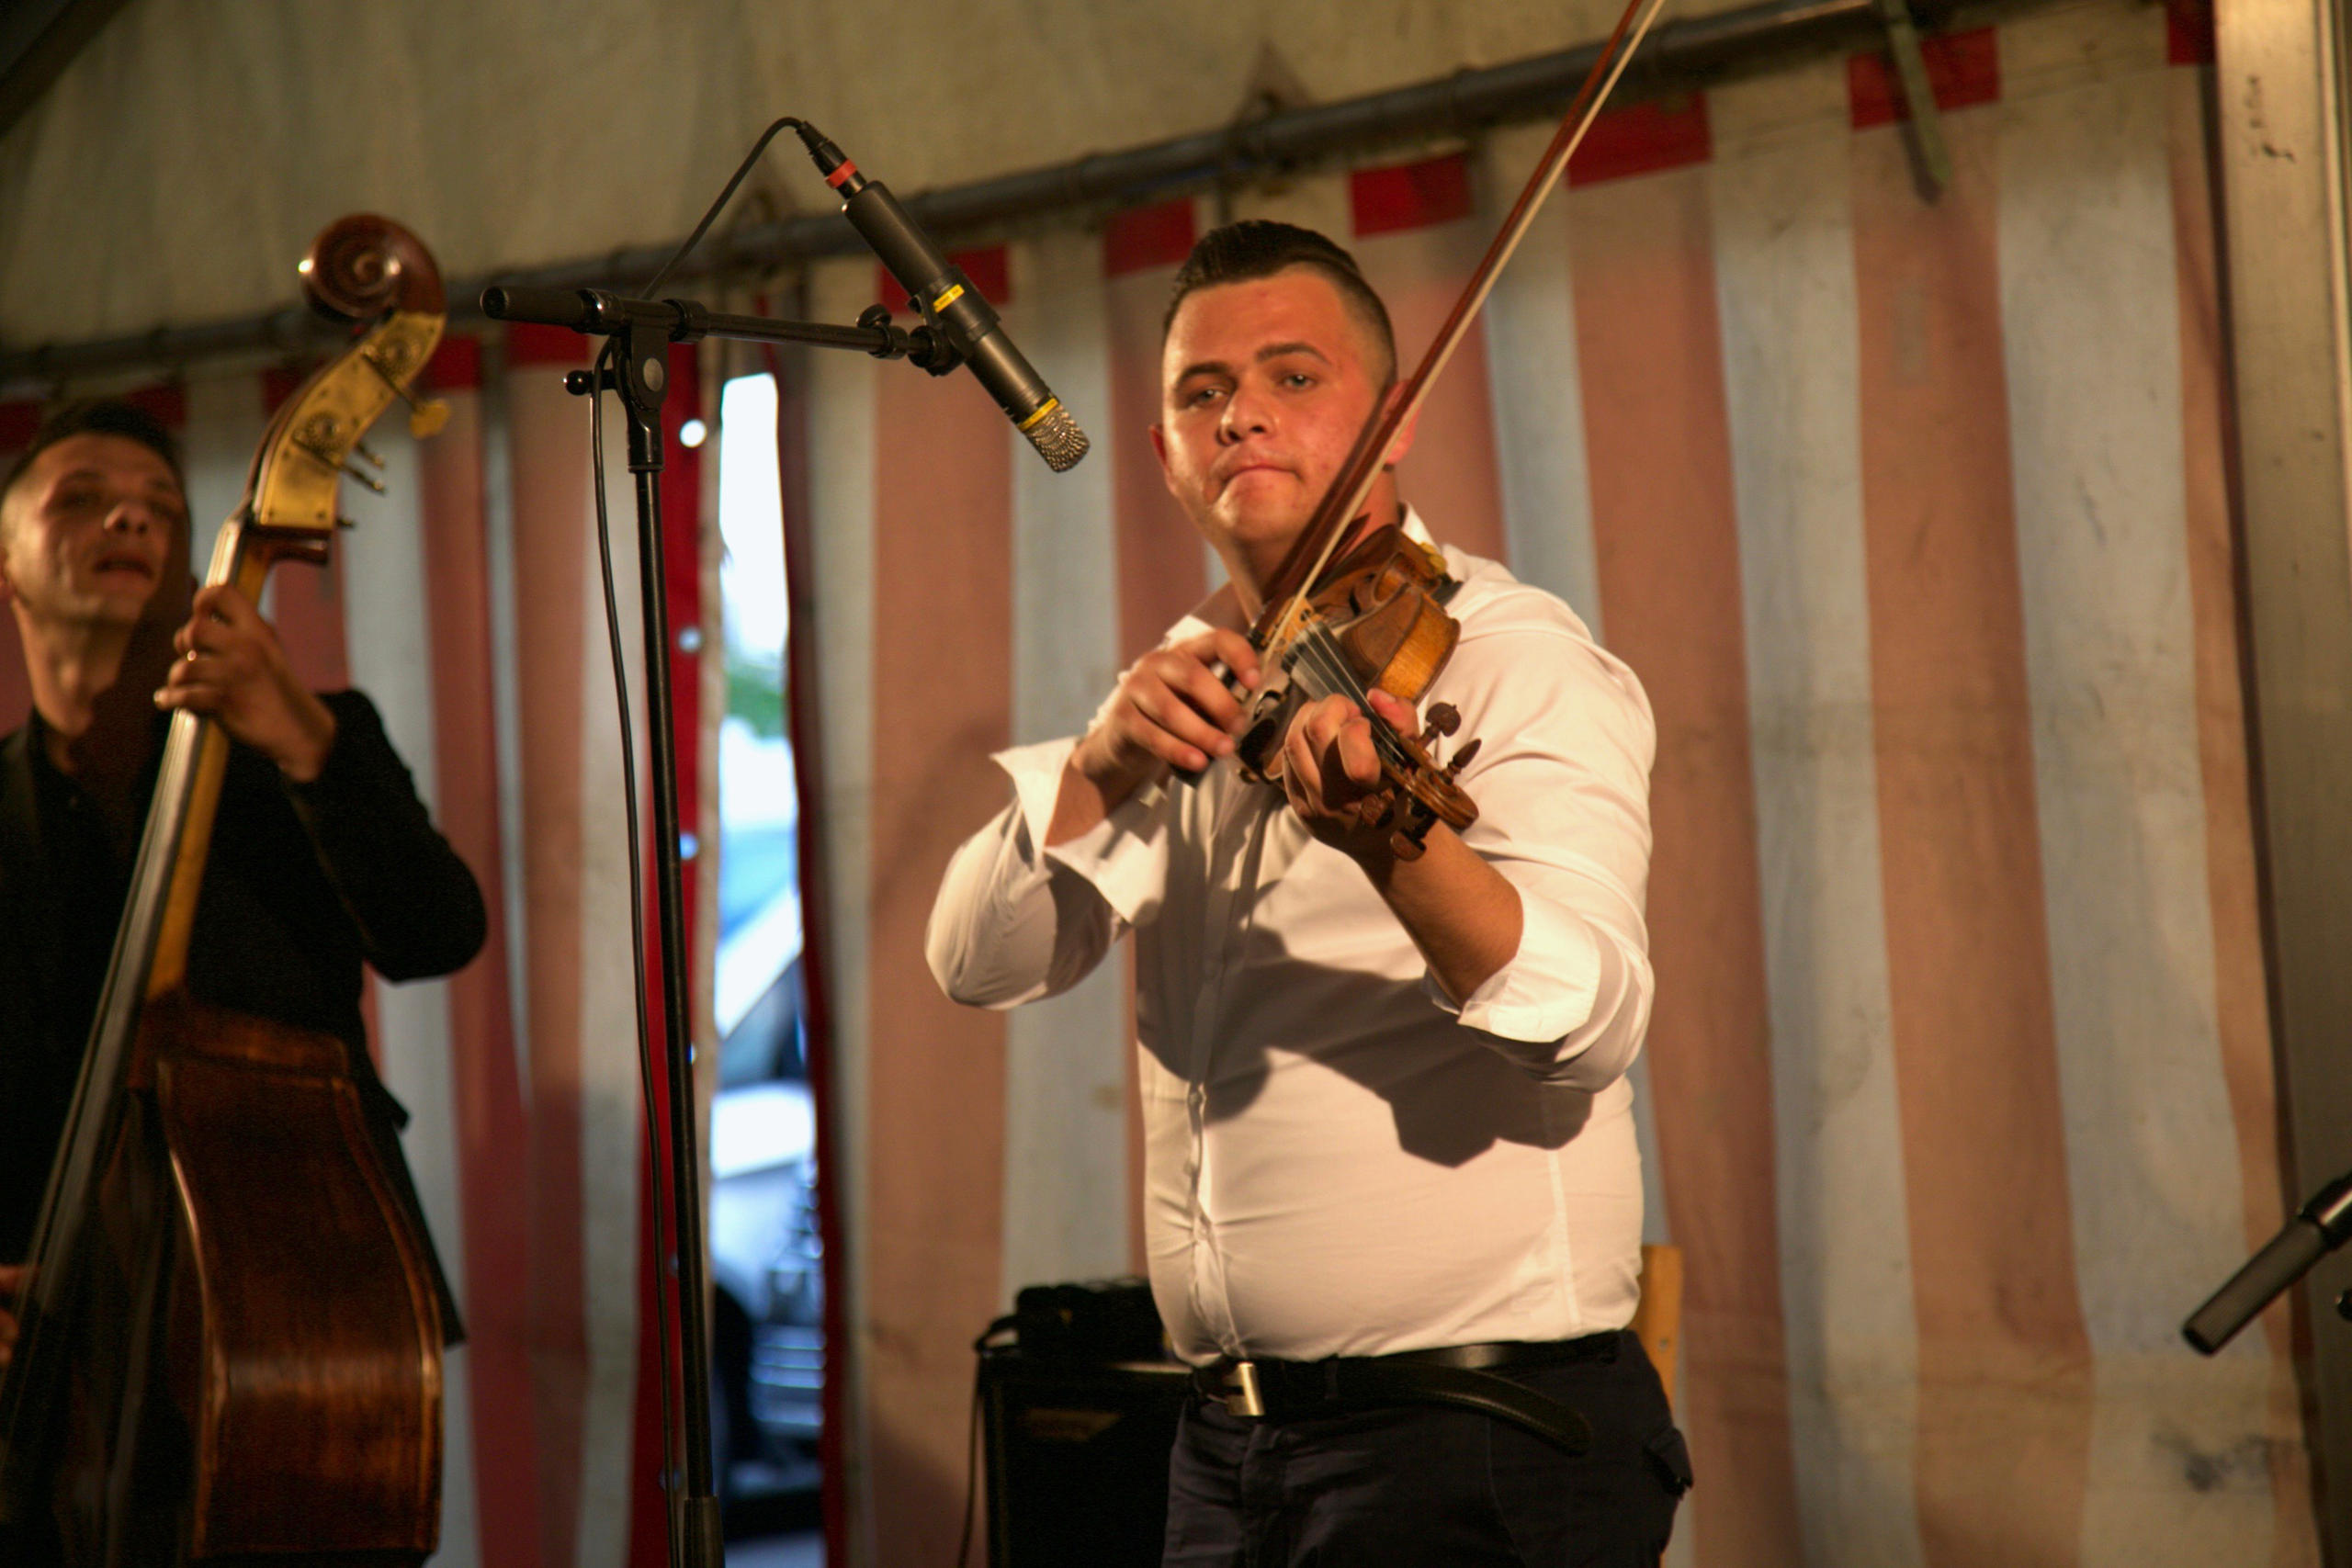 A man playing violin in a party tent, to the left of him a man is playing double bass.